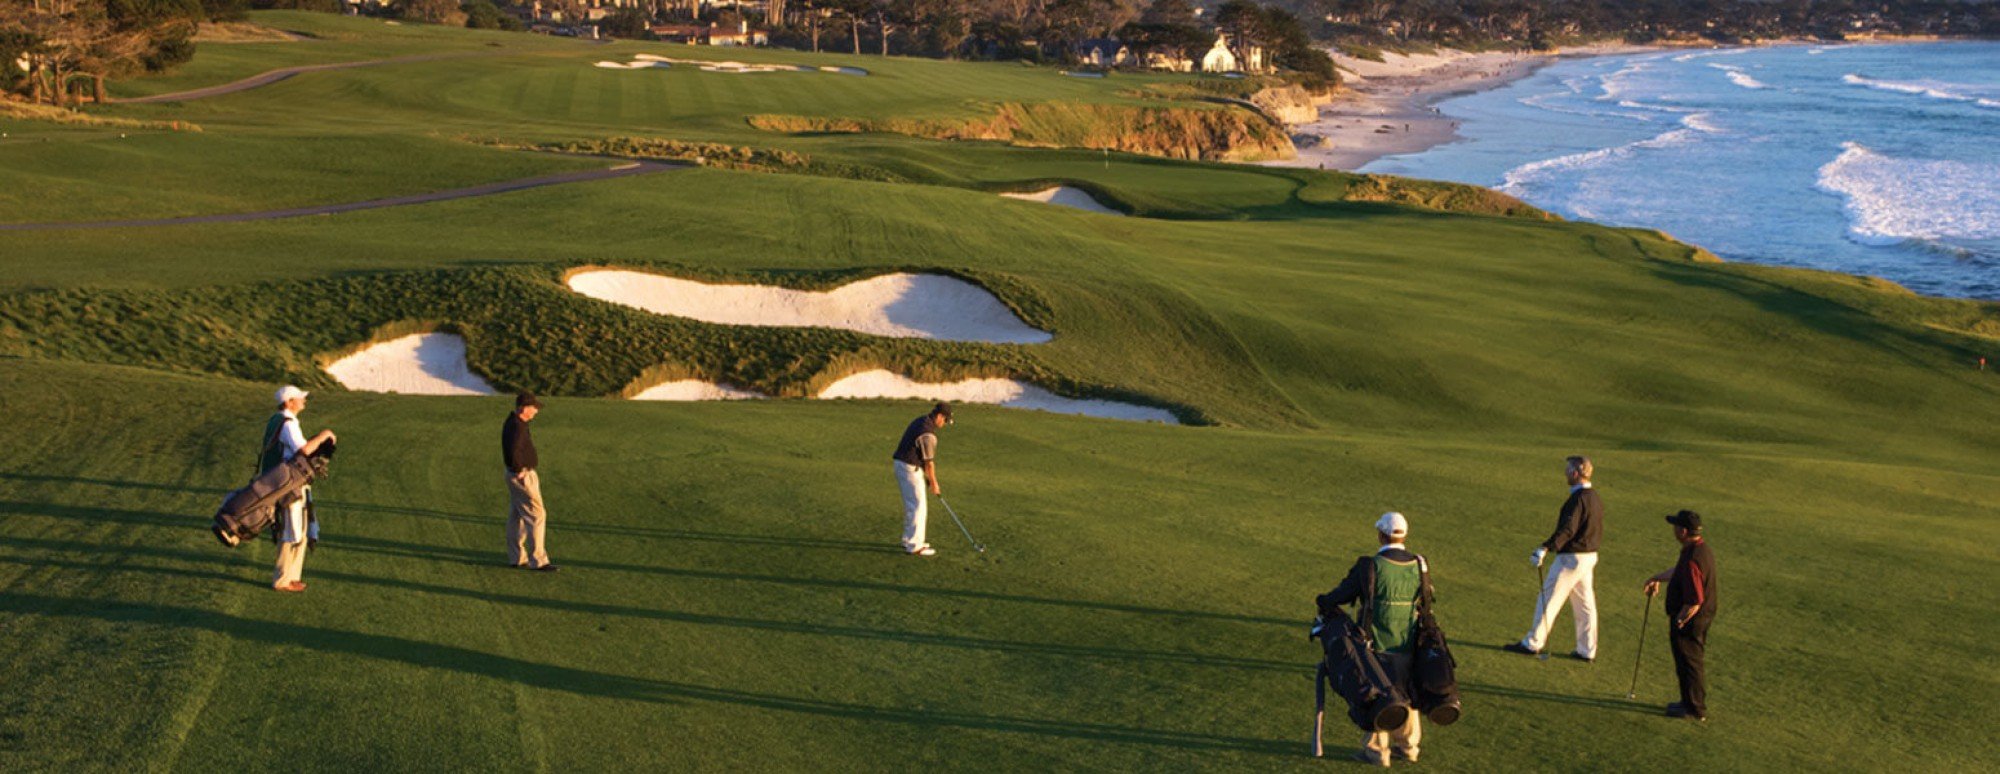 Private Golf Tournaments at Pebble Beach Resorts